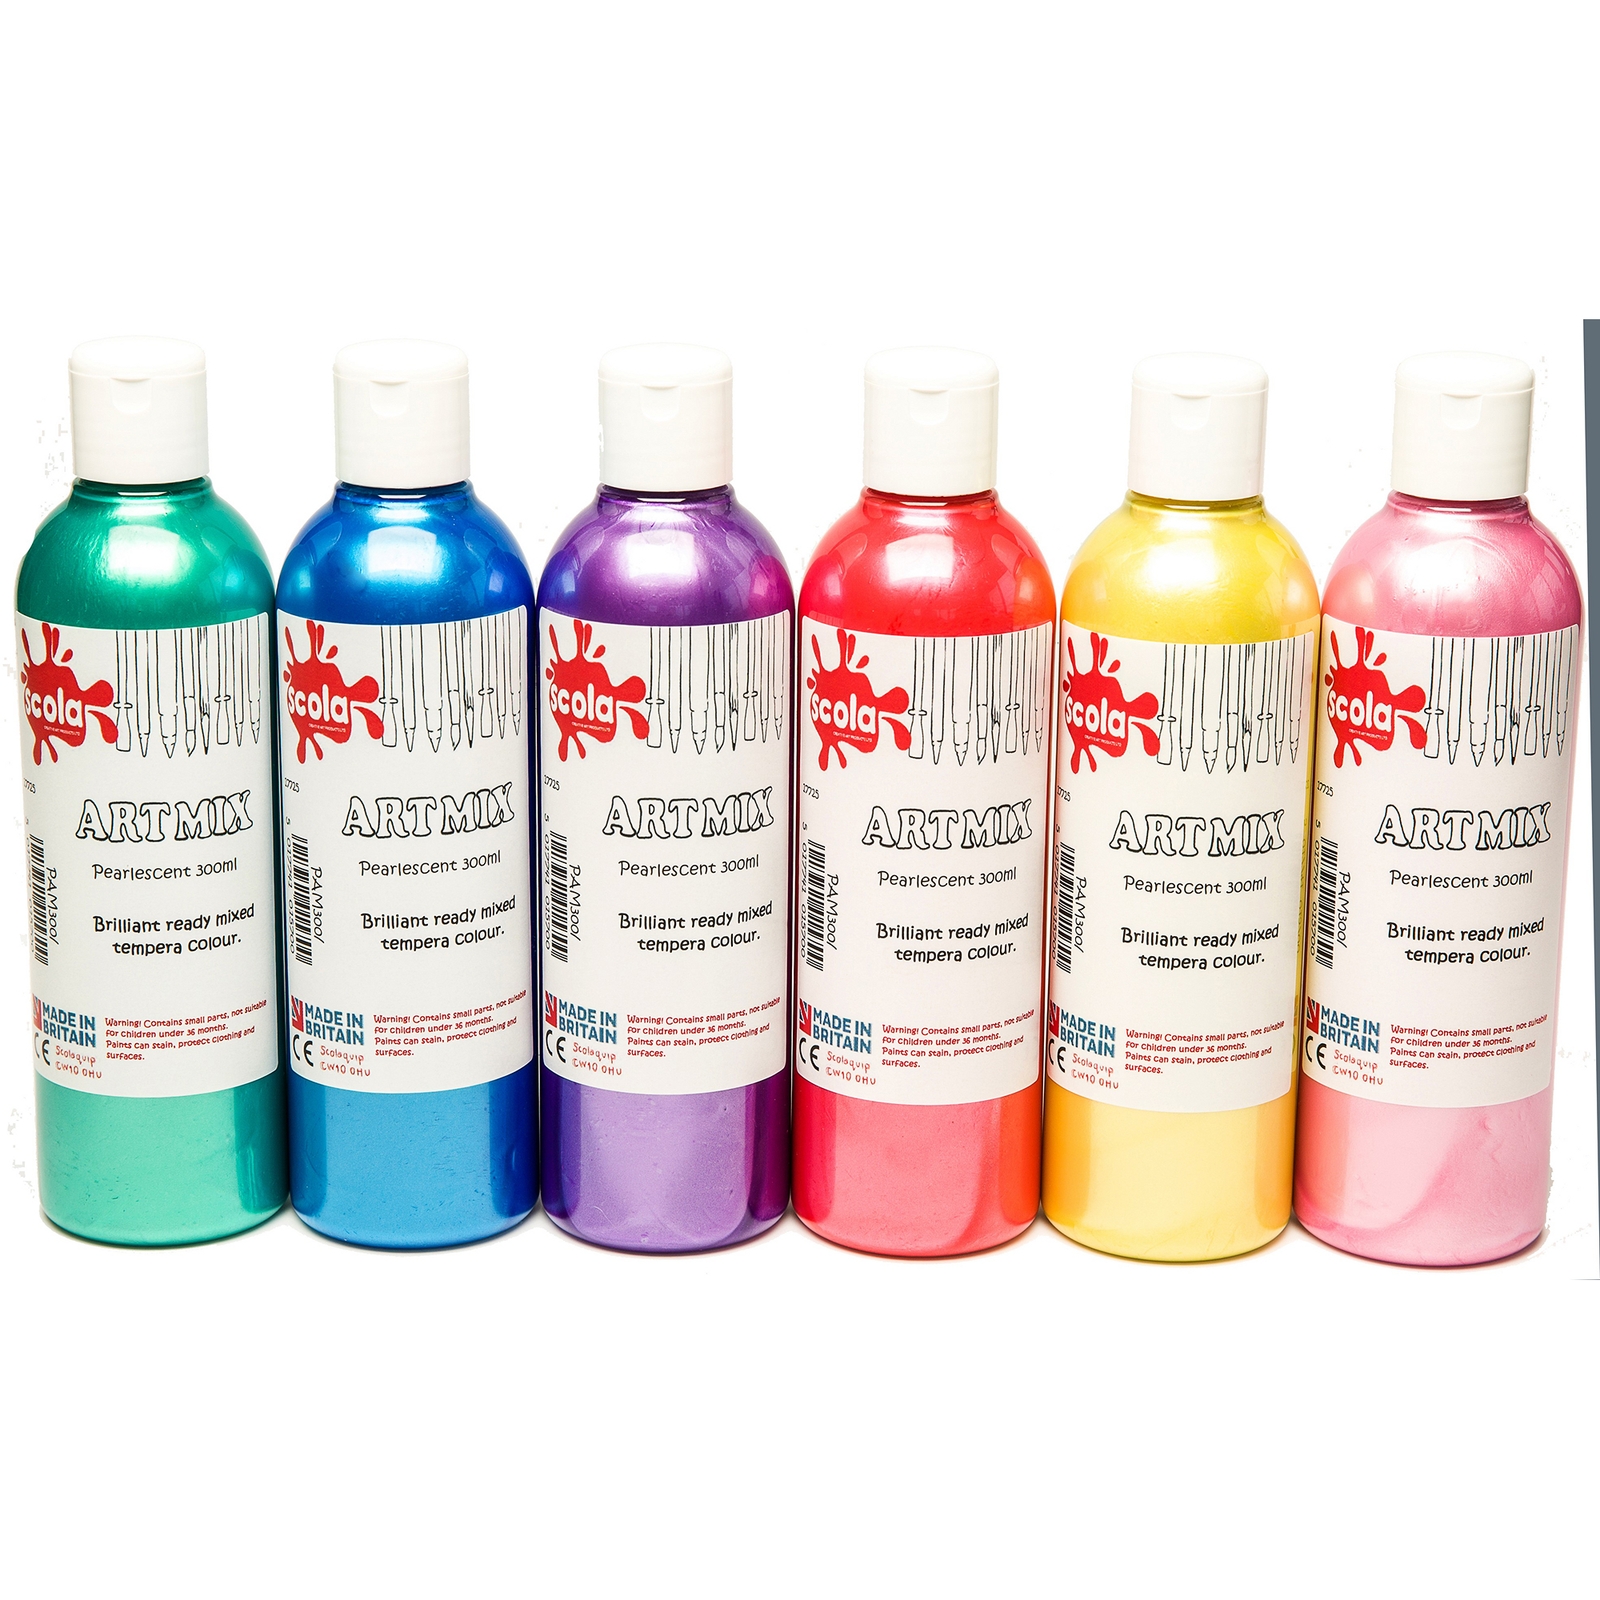 Scola Pearlescent Artmix Ready Mixed Paint - 300ml - Assorted - Pack of 6